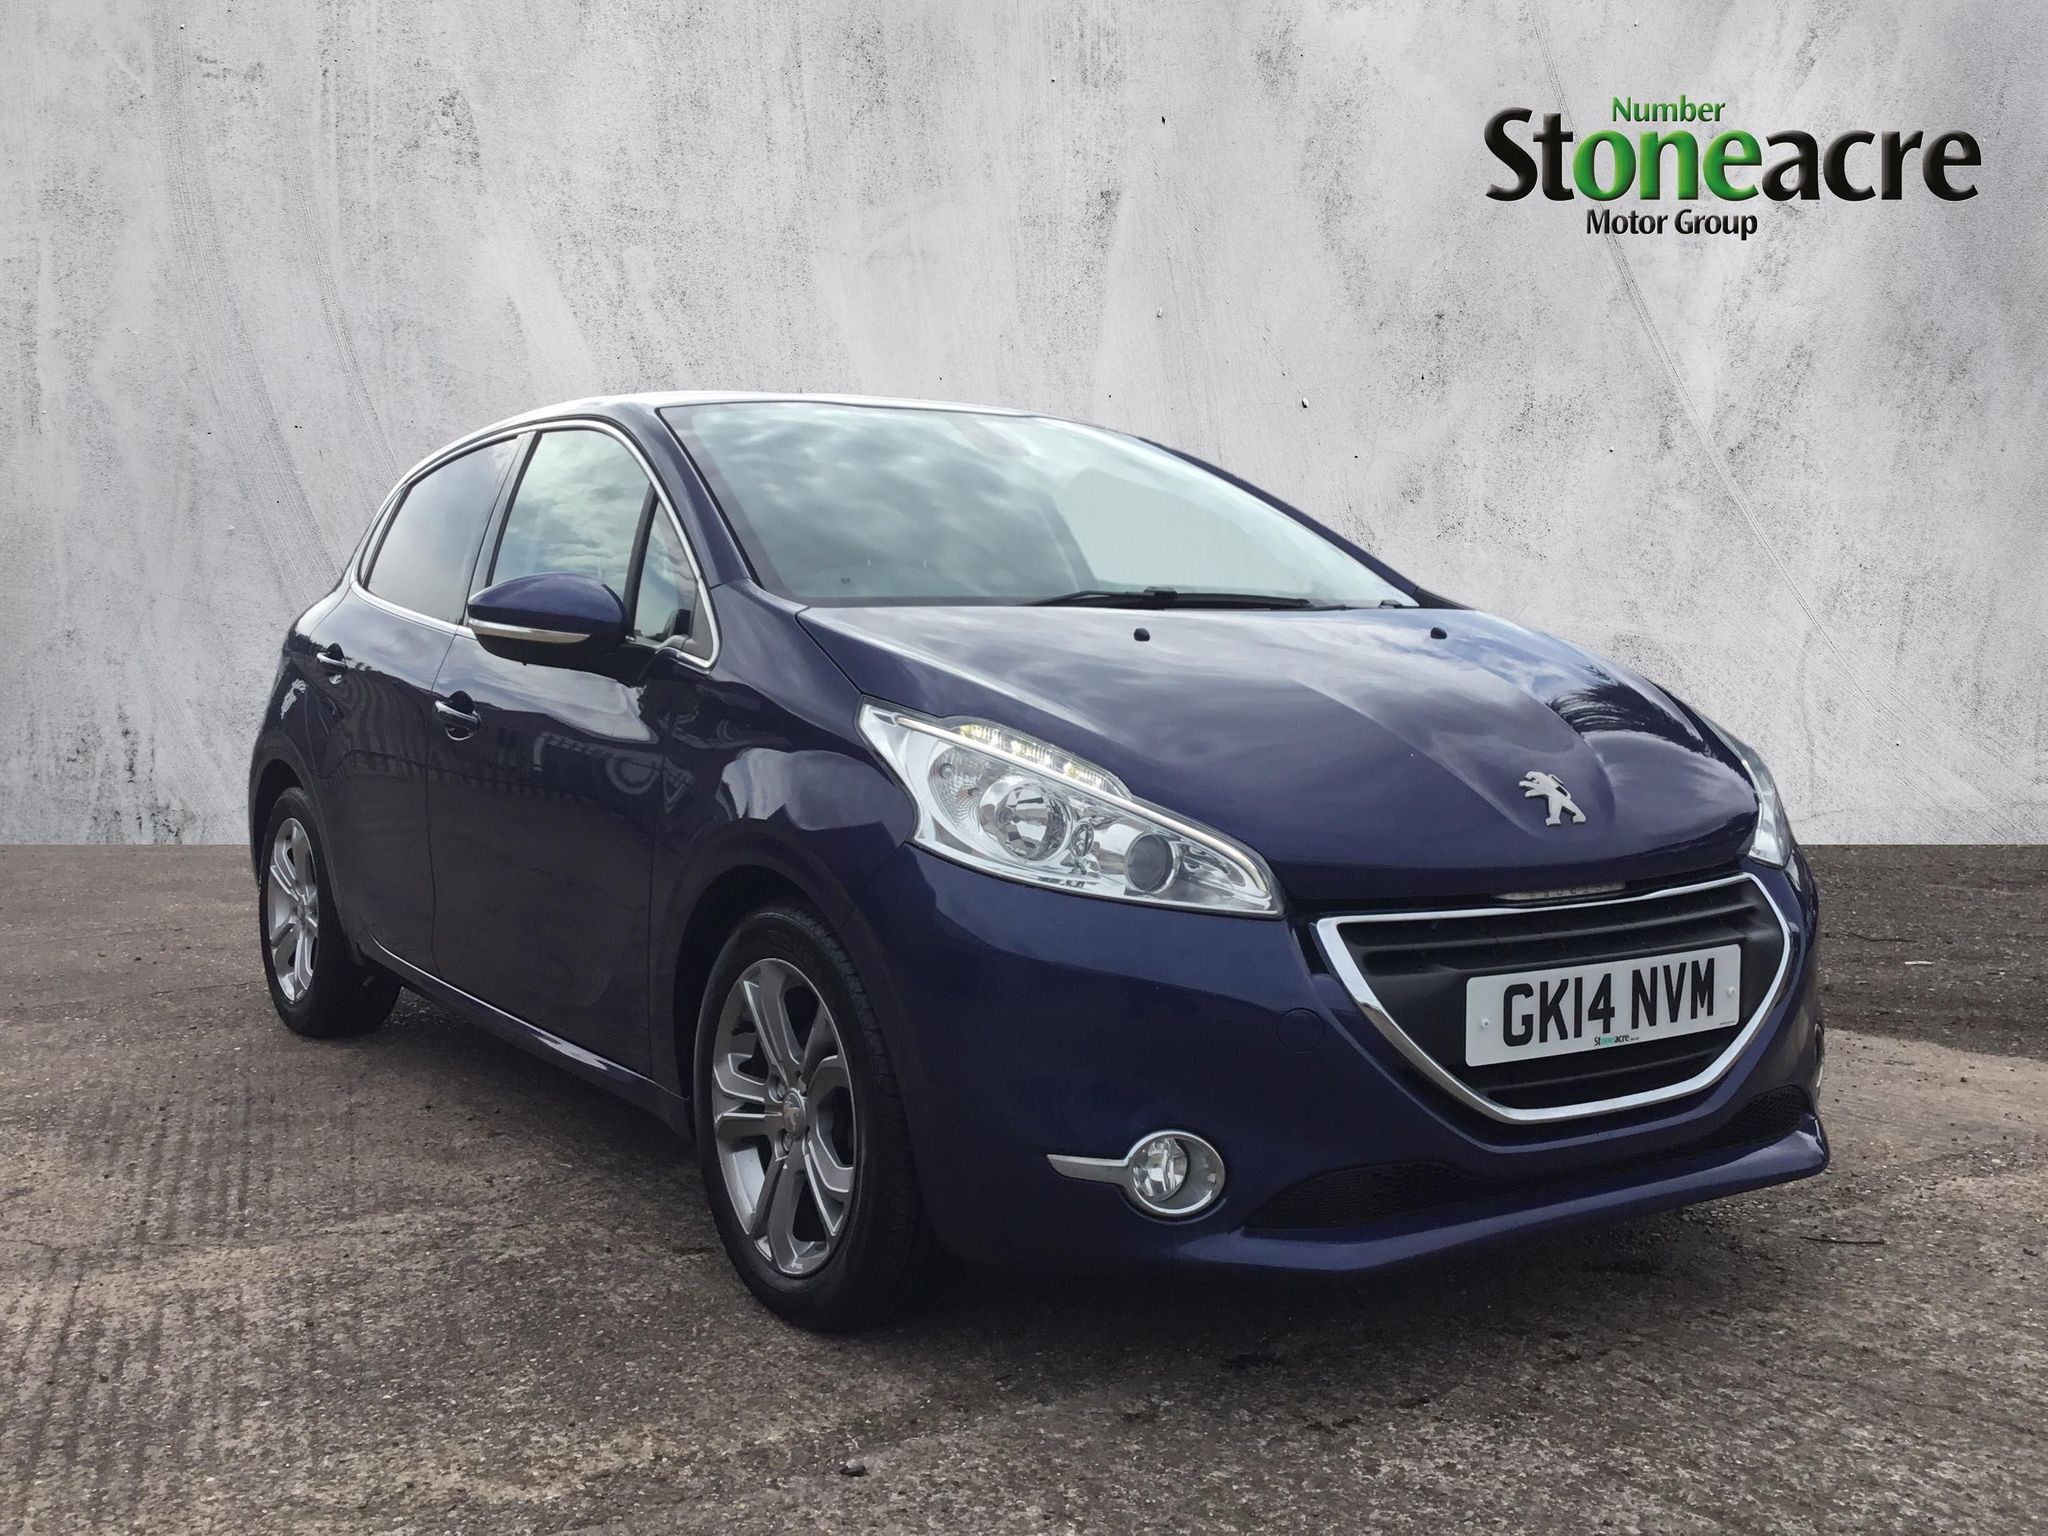 Used Peugeot Cars for Sale  Stoneacre